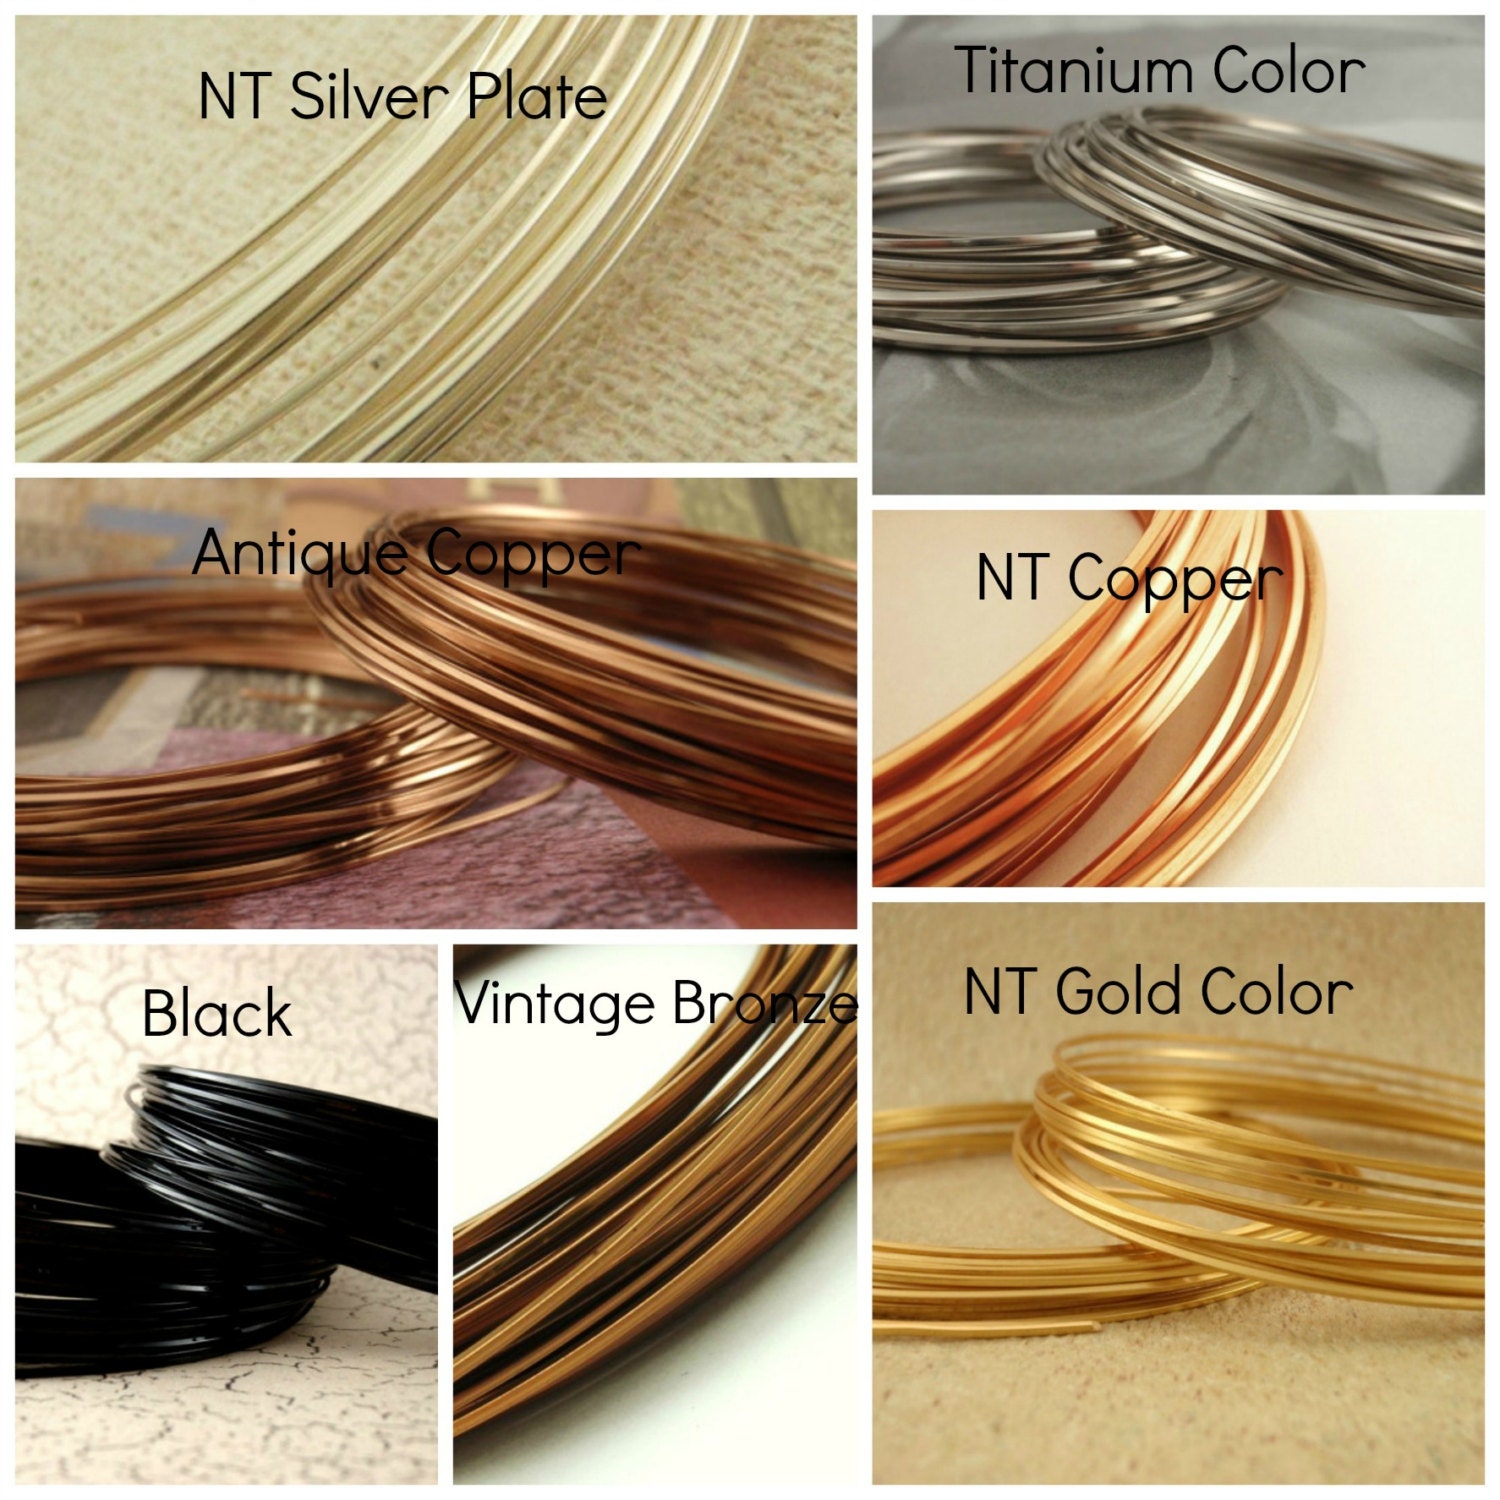 ParaWire Gold-Finished Silver-Plated Copper Craft Wire 20-Gauge 6-Yards  with Clear Protective Coating